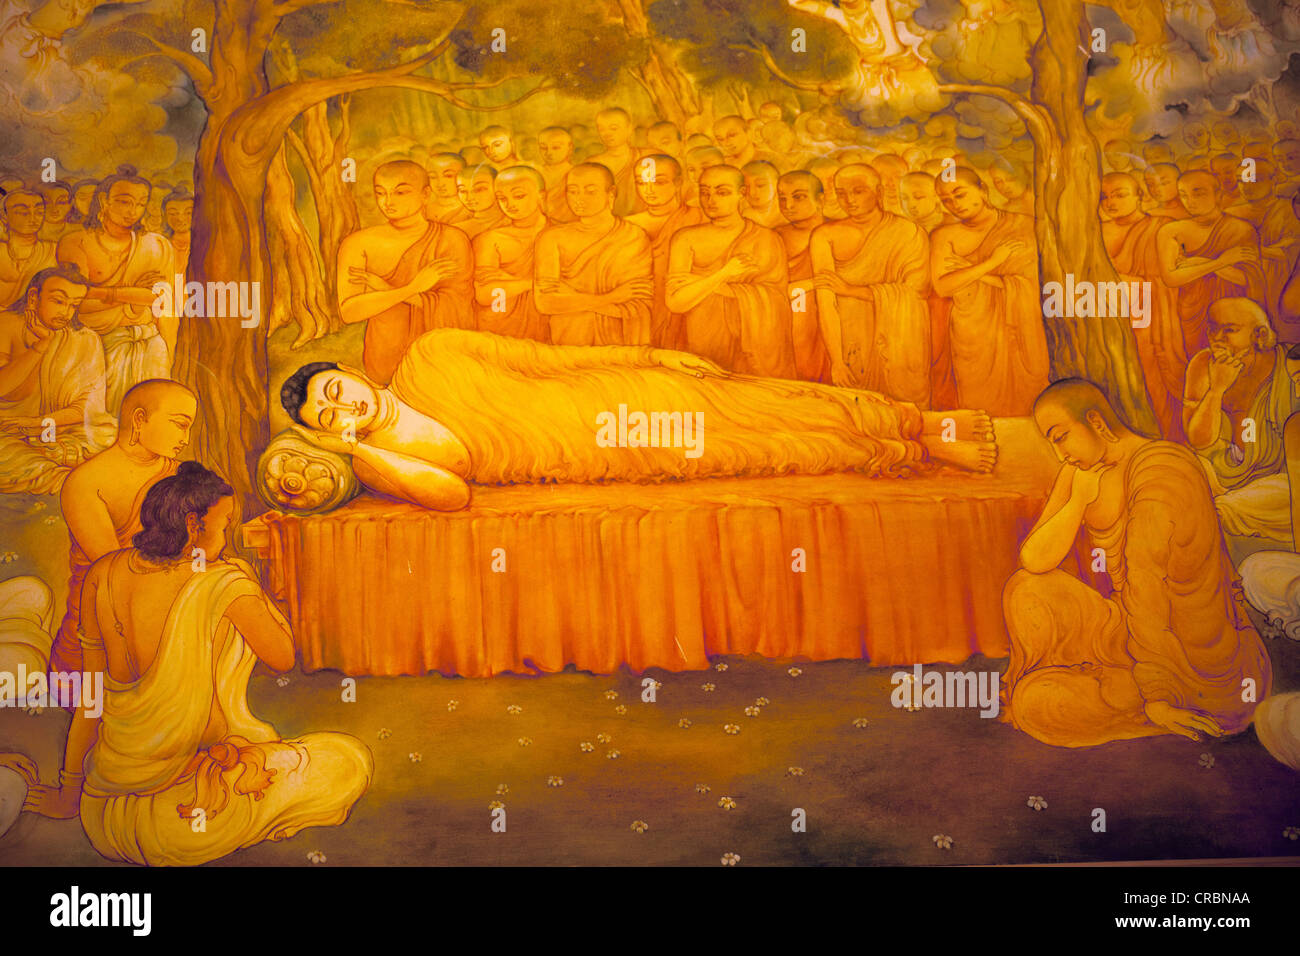 Painting of a reclining Buddha at the Temple of the Tooth, also known as Sri Dalada Maligawa, Kandy, Sri Lanka, Indian Ocean Stock Photo